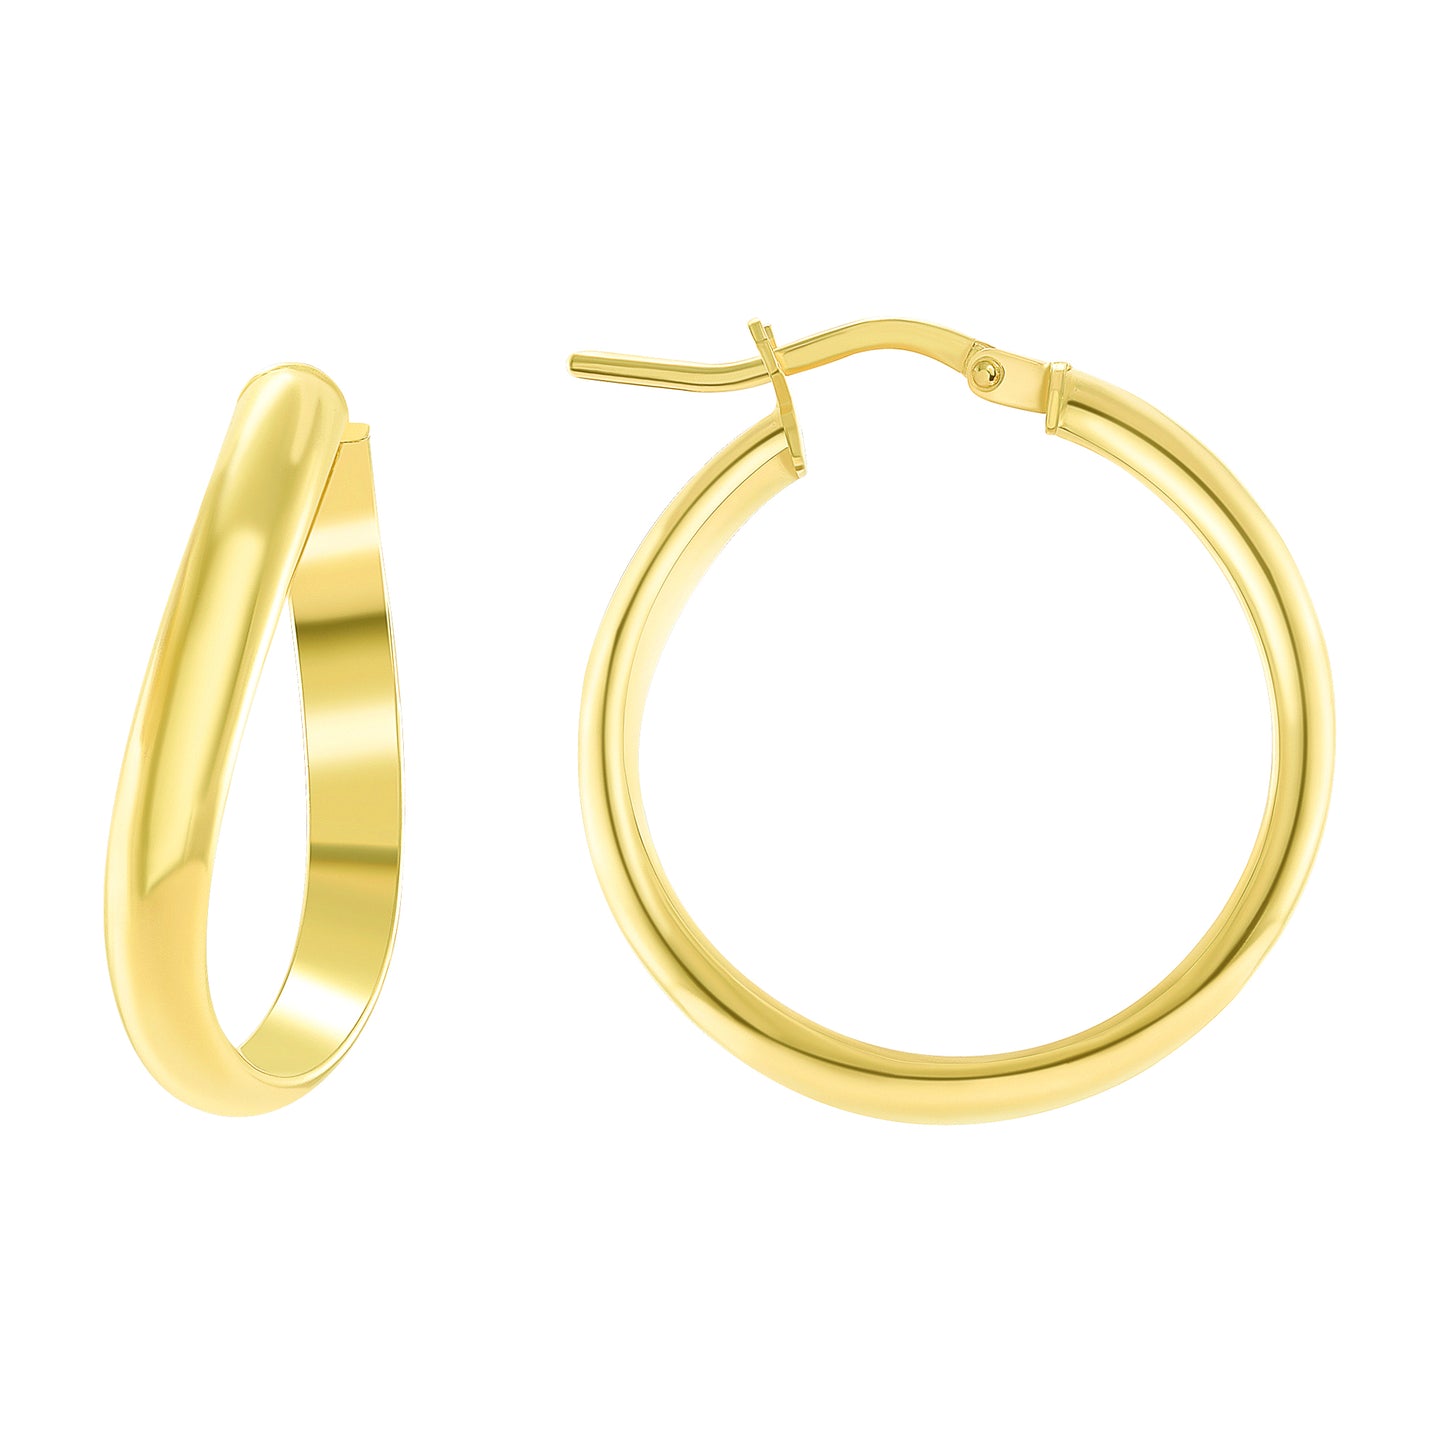 Silver 925 Gold Plated Concave 4MM X 20 MM Plain Hoop Earring. ITHP43-20MG